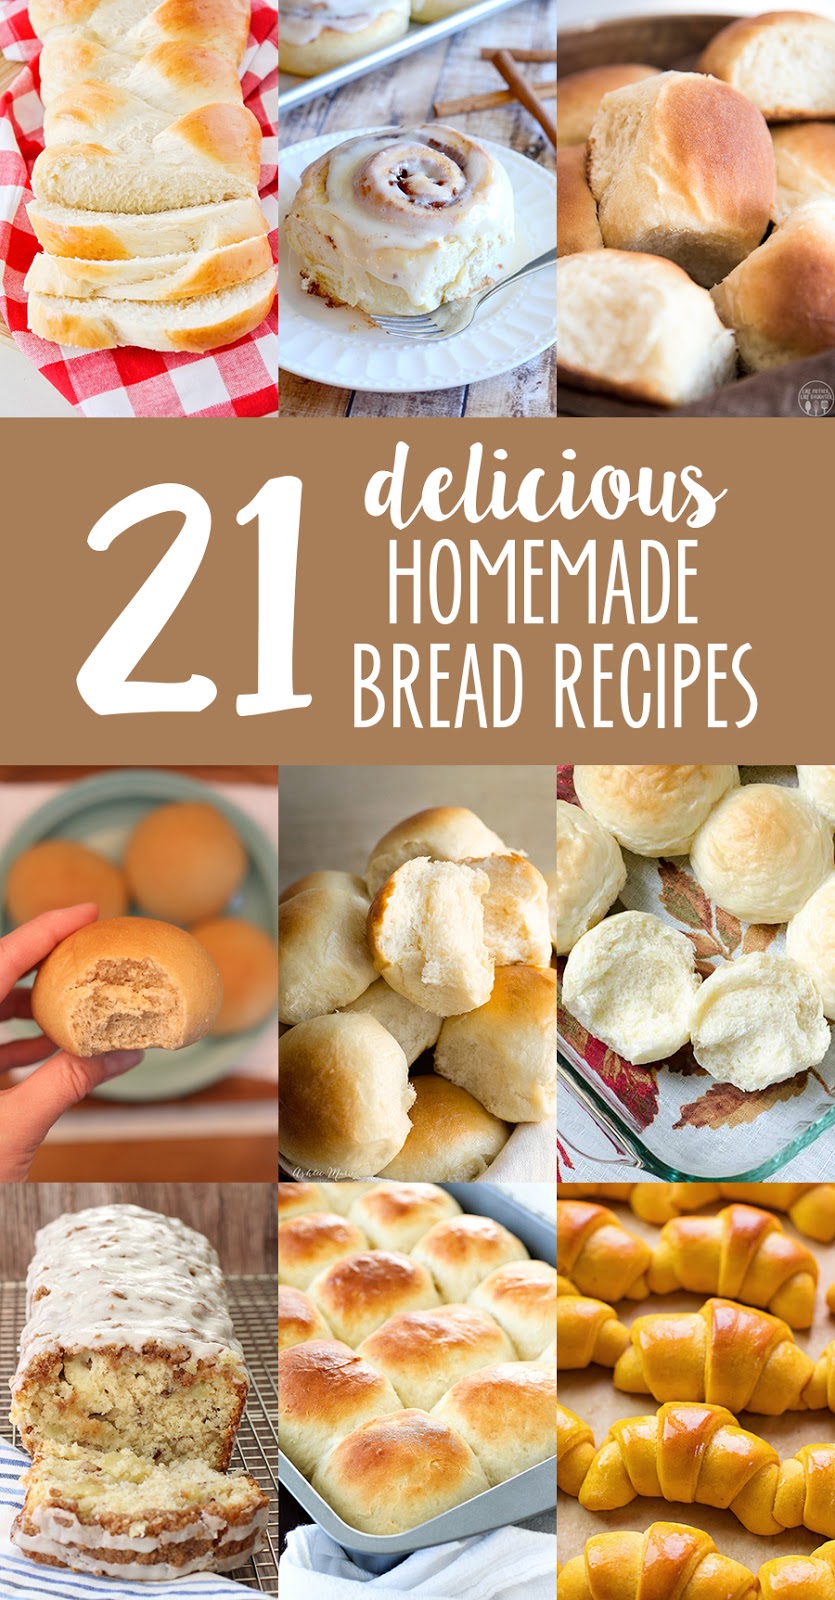 21 fantastic and delicious homemade bread recipes from your favorite food bloggers!